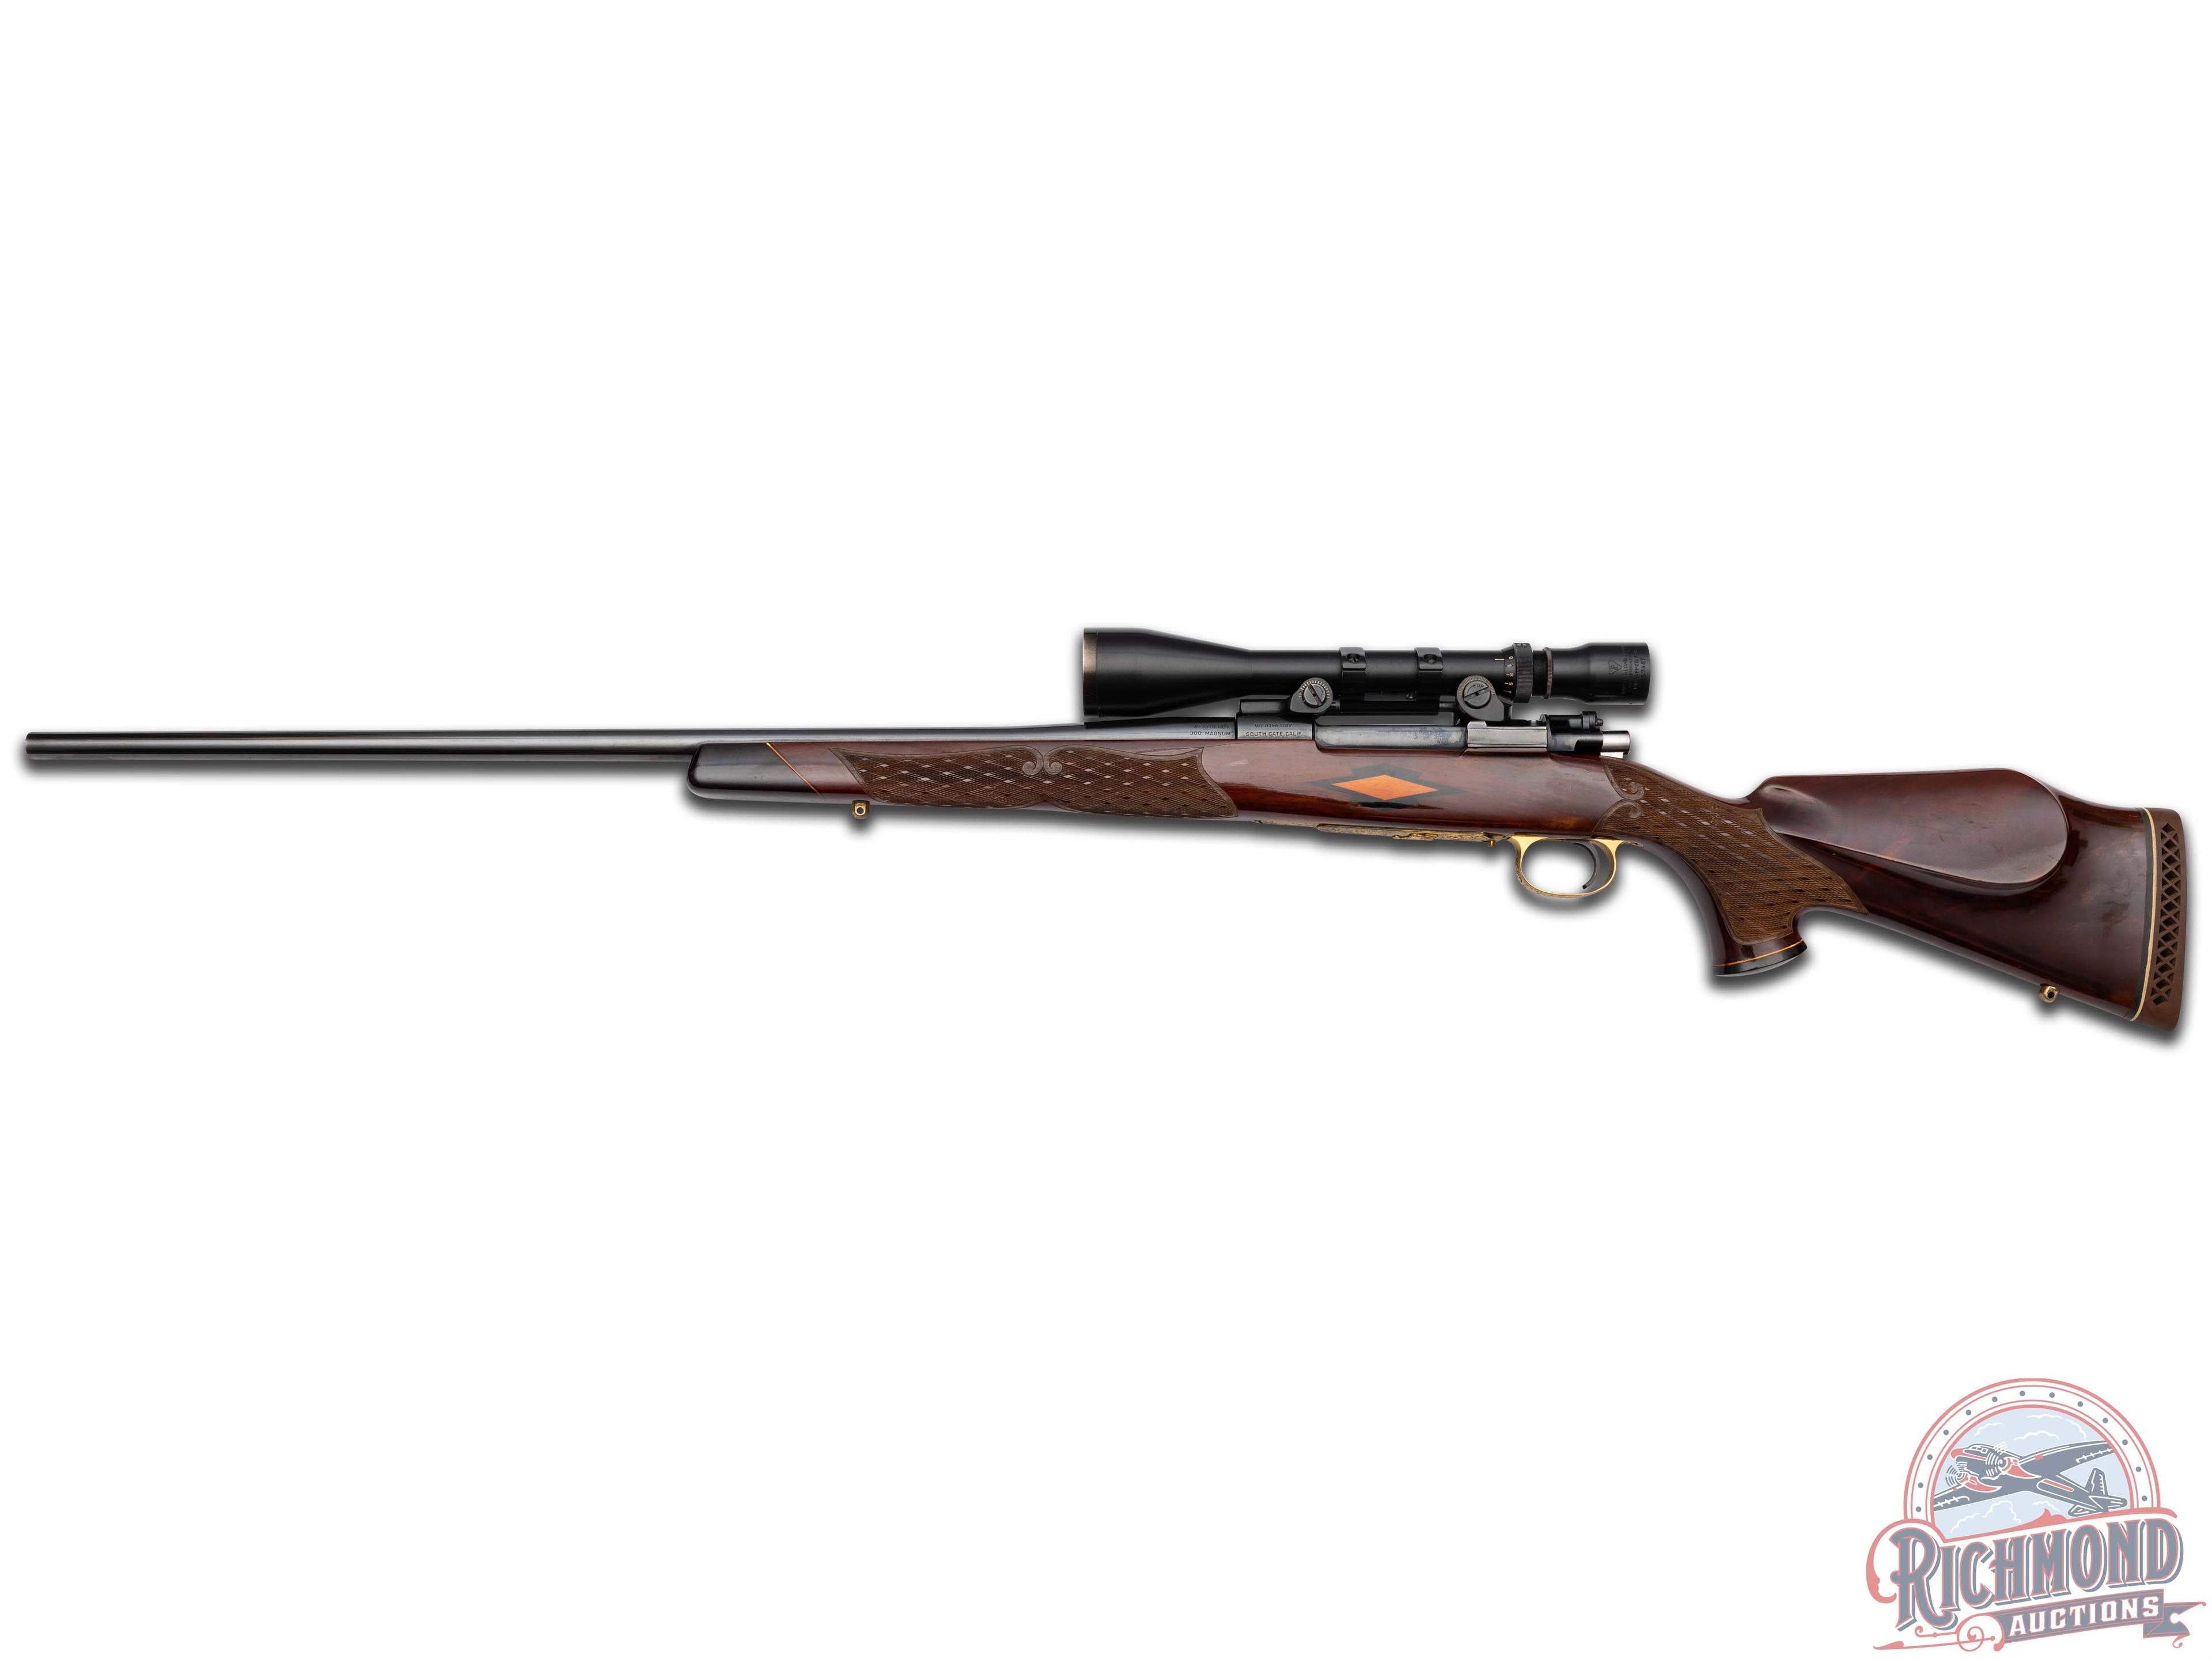 1957 Weatherby South Gate, CA Mauser Series Bolt Action Rifle in 300 WBY Mag & Scope